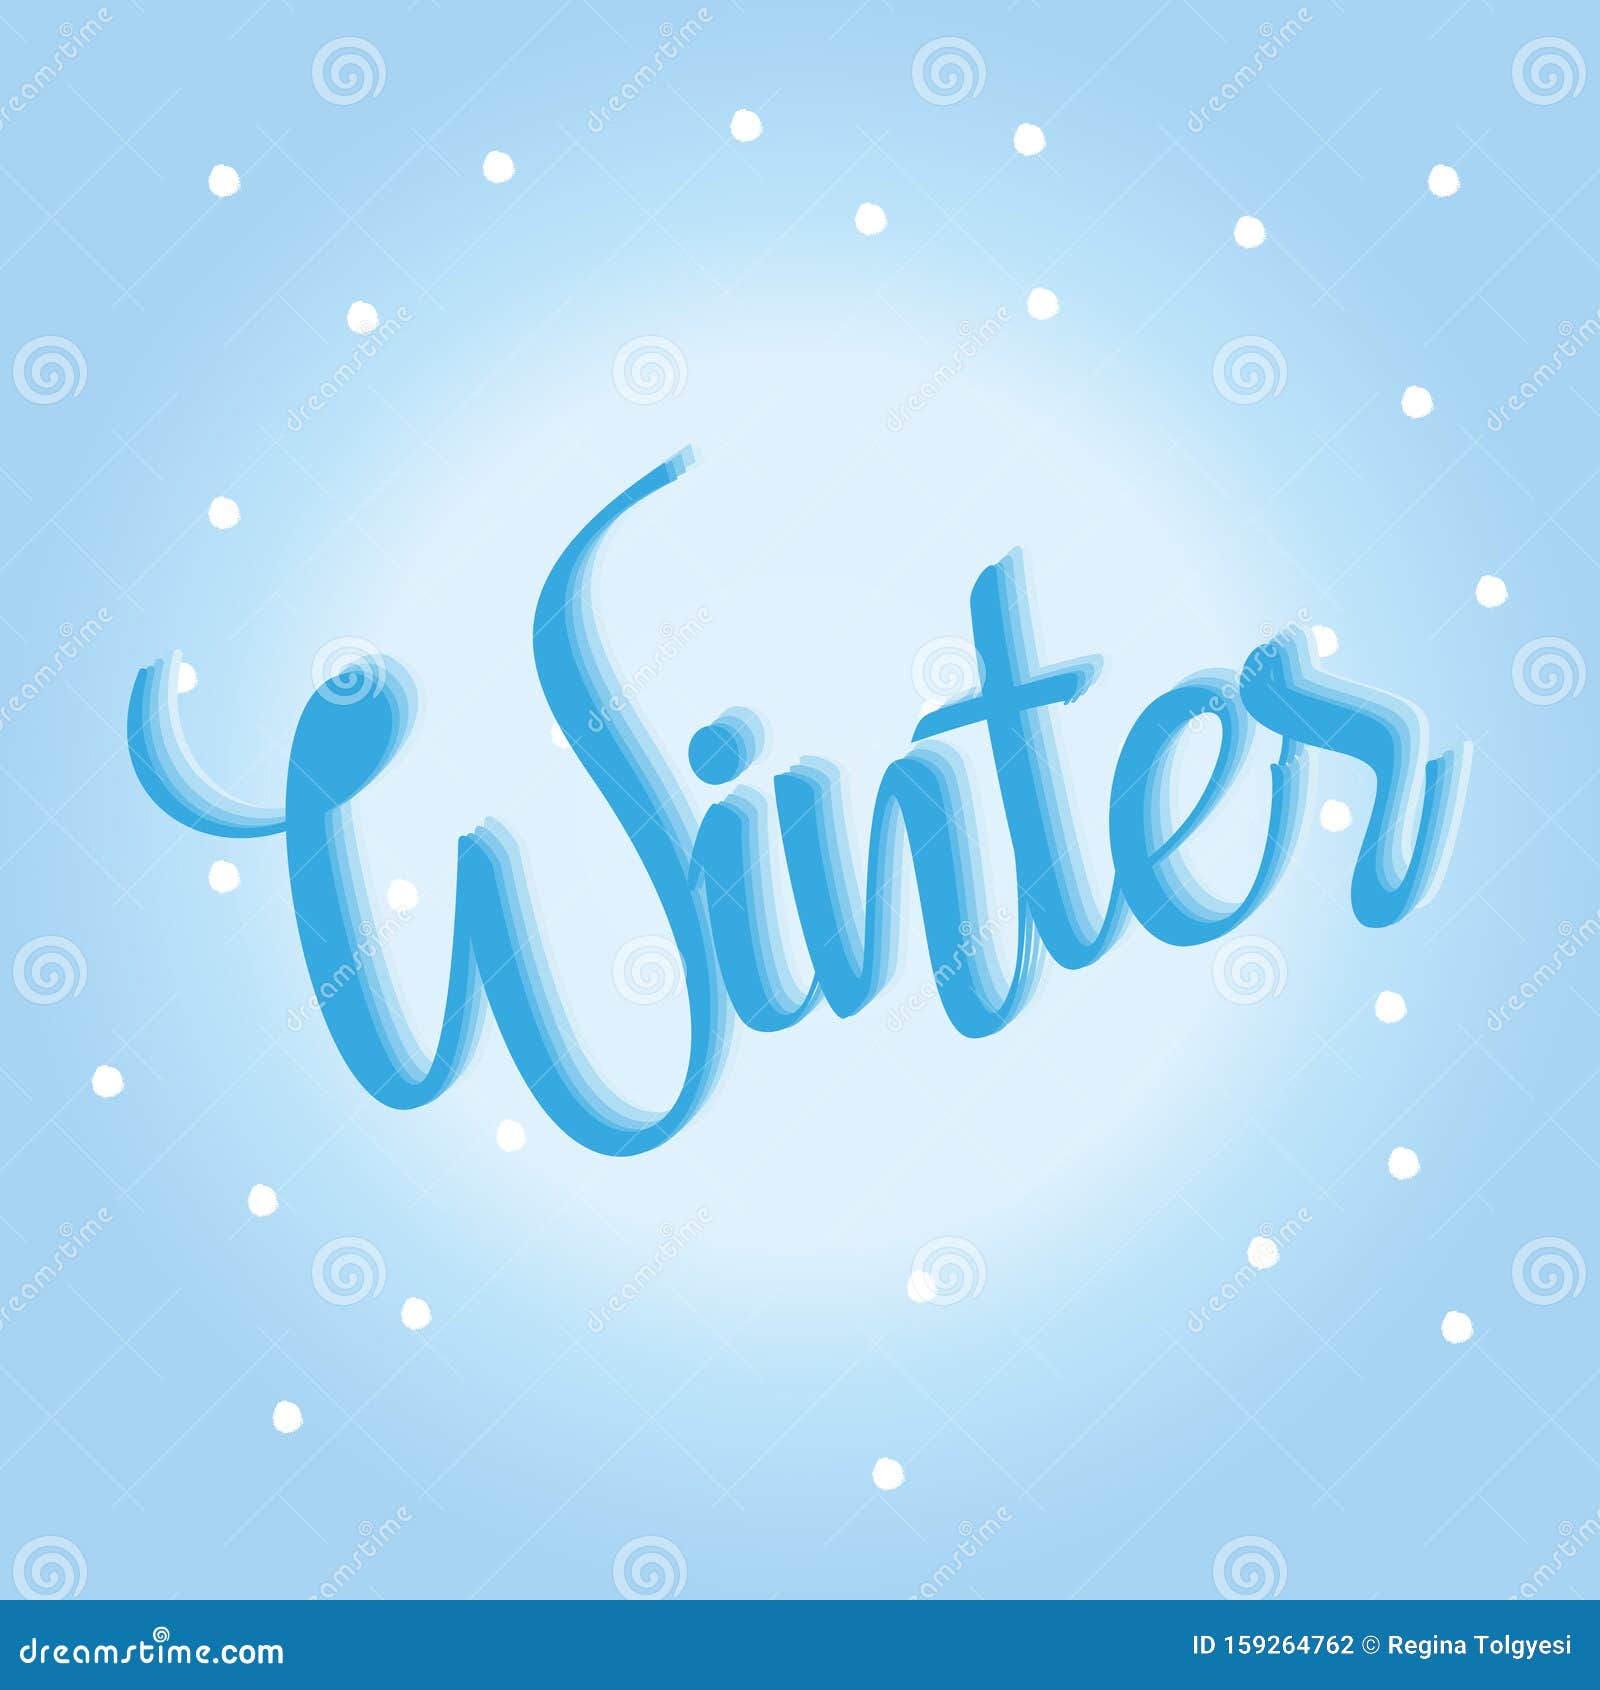 winter text and christmas greeting card template with text on snowfall patterned lightblue background